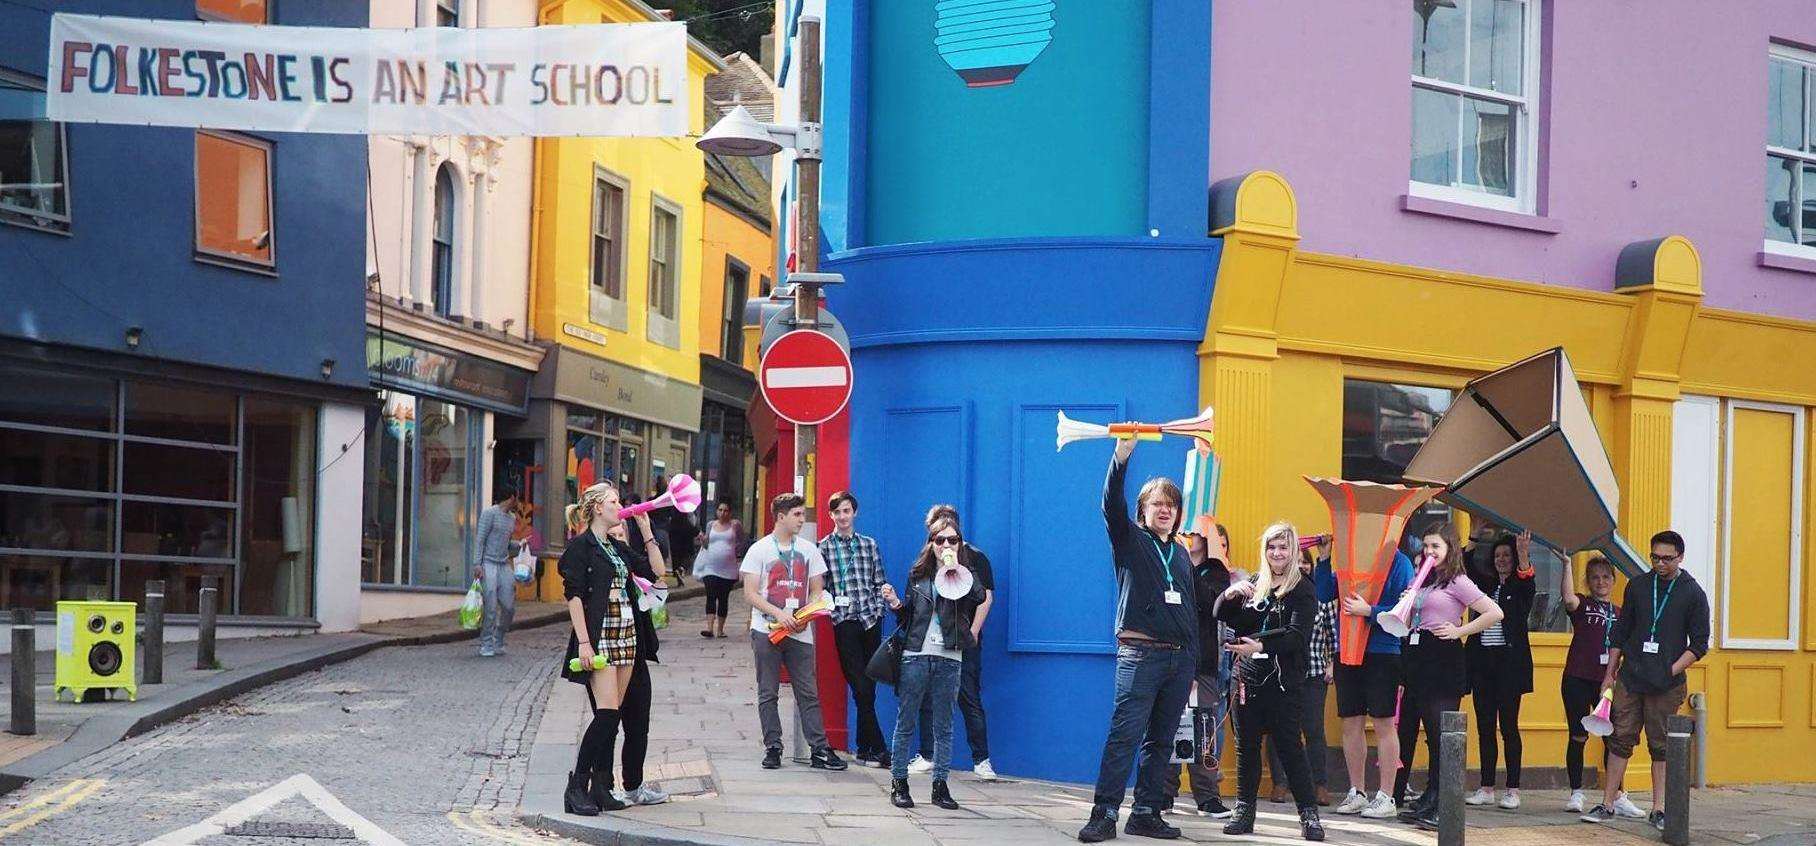 Students of EKC College at the Old High Street in Folkestone helping to promote the town as an art school (3441534)